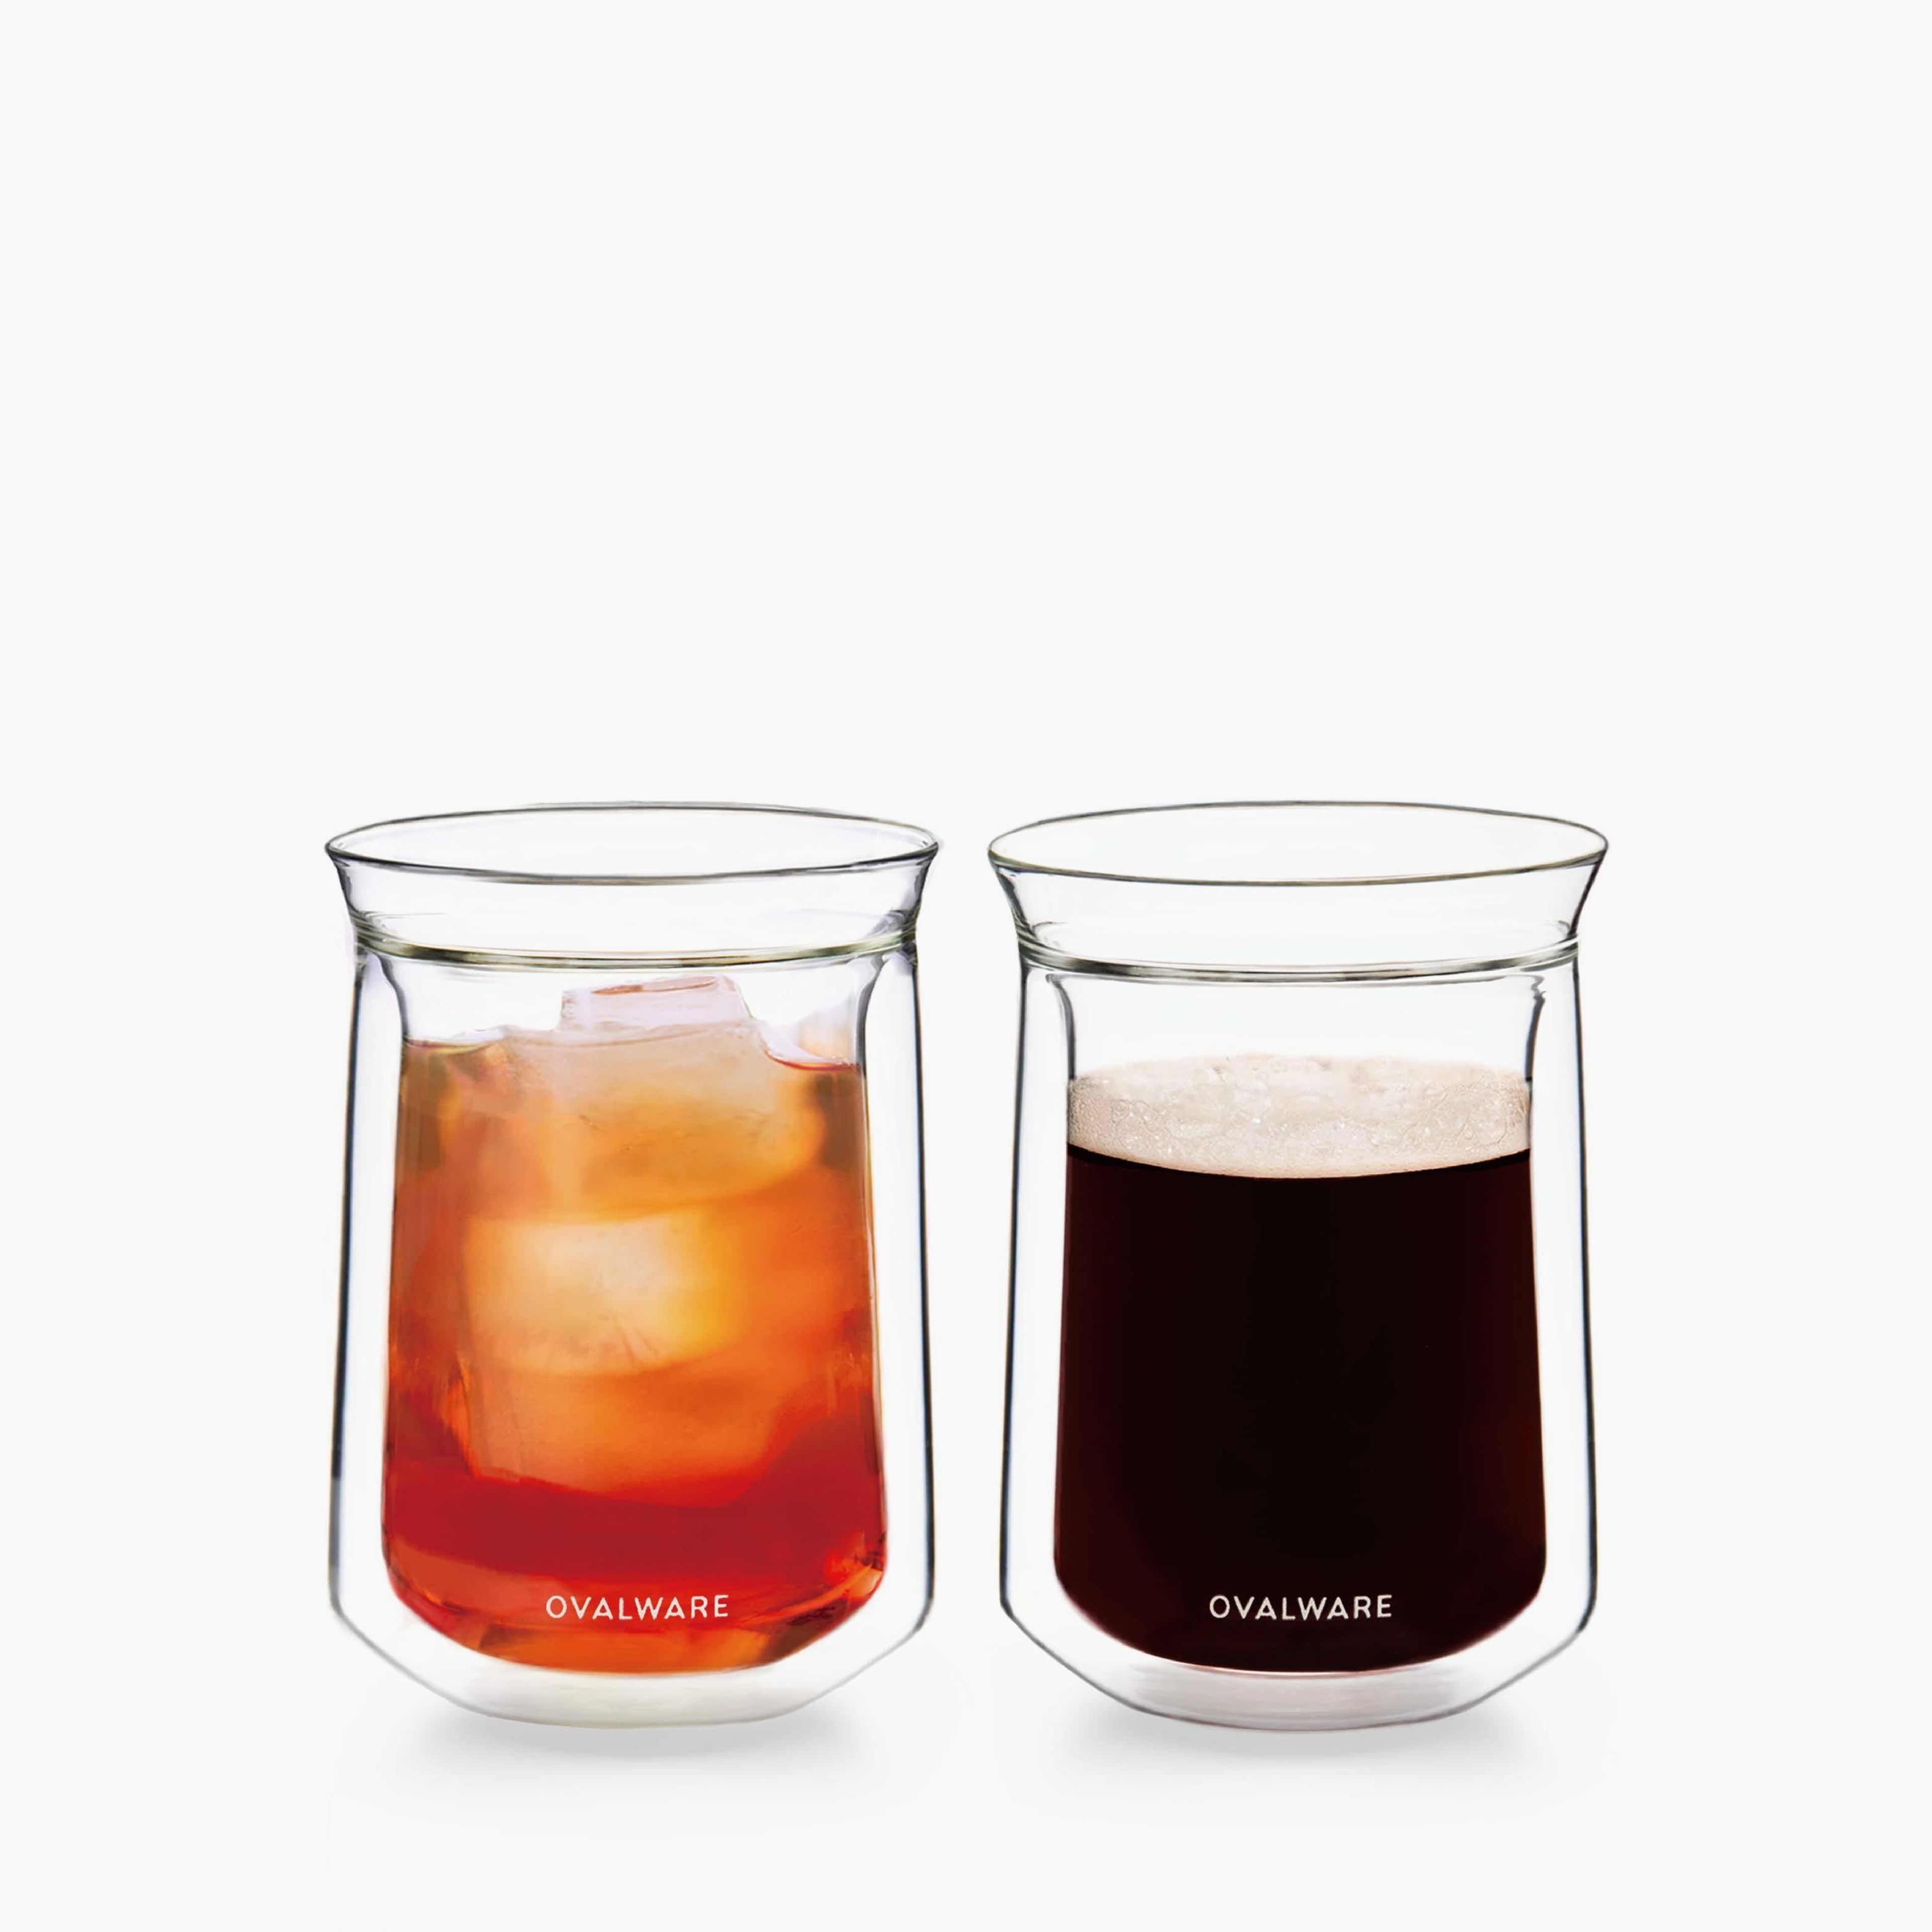 Double Wall Tasting Glass Cup by OVALWARE - 2/set